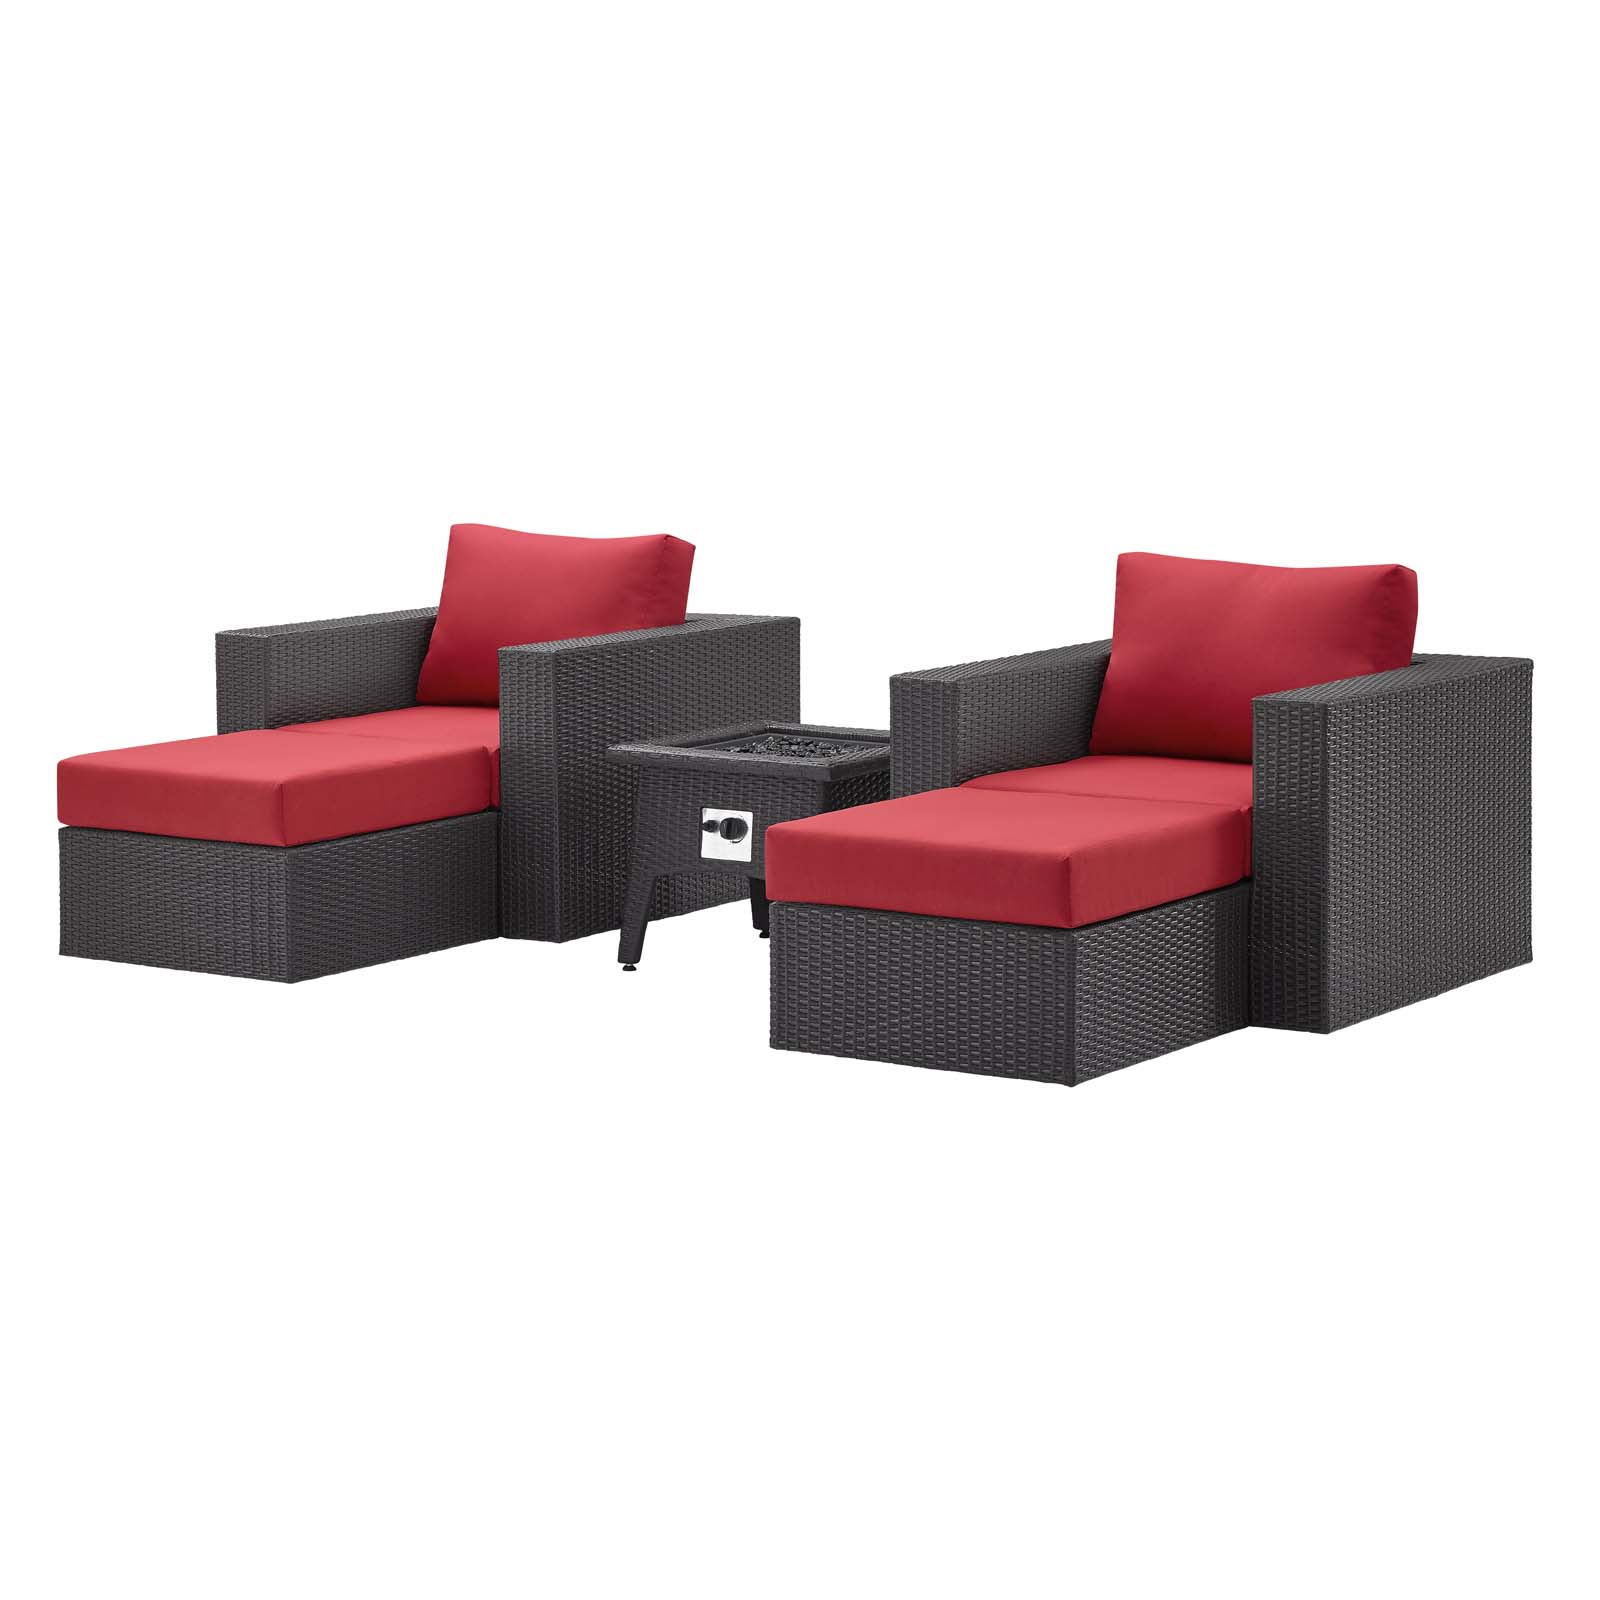 Contemporary Modern Urban Designer Outdoor Patio Balcony Garden Furniture Lounge Sofa, Chair and Coffee Table Fire Pit Set, Fabric Rattan Wicker, Red - image 1 of 9